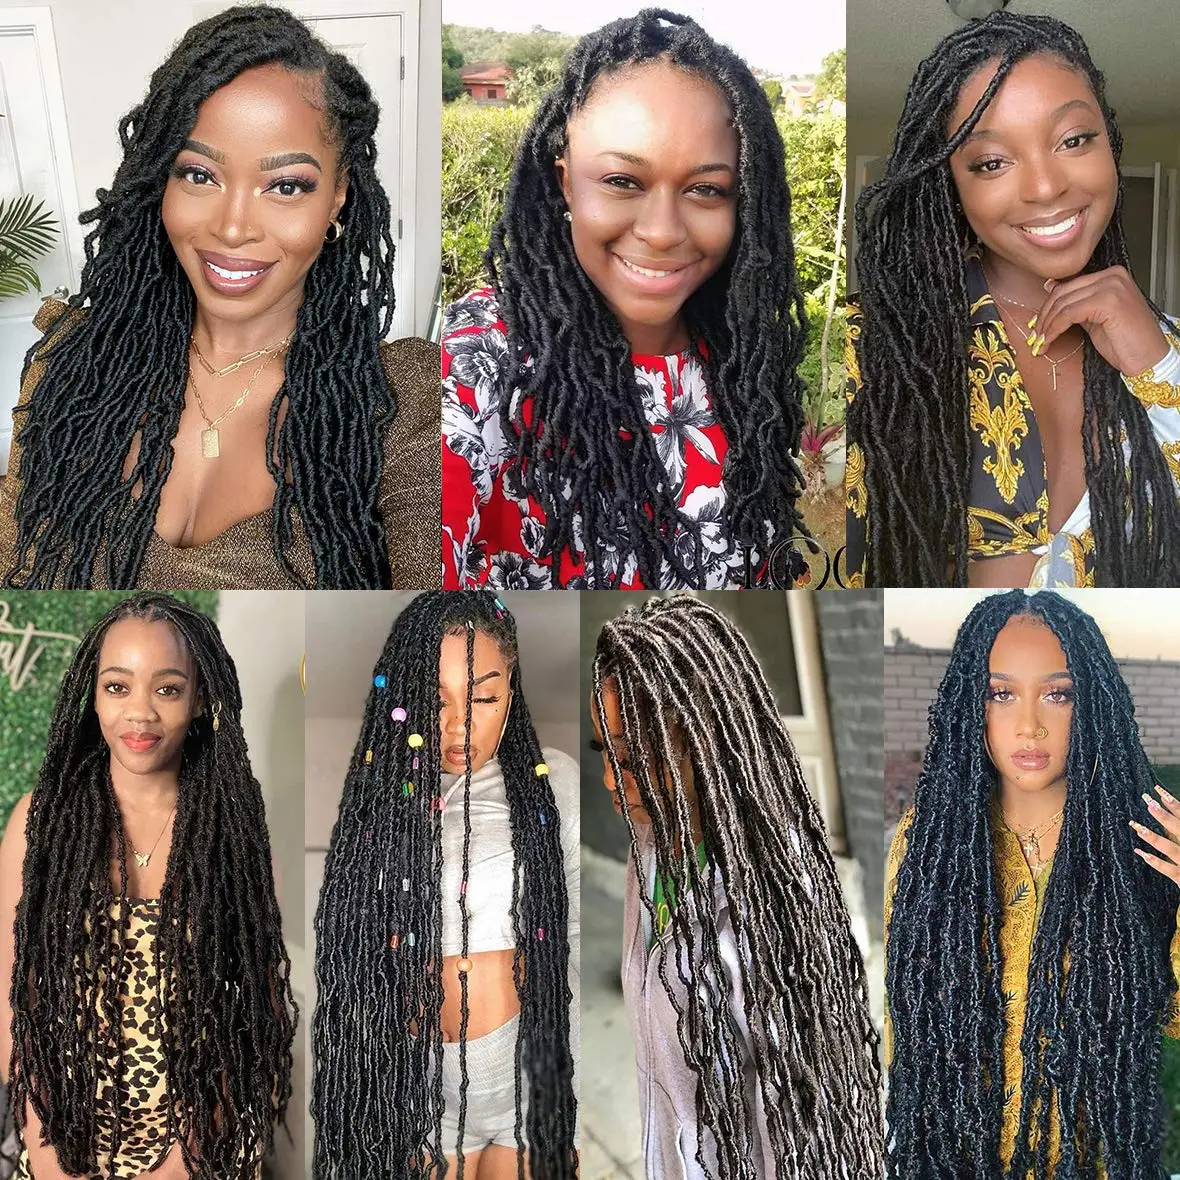 Goddess Locs Crochet Hair 12 Inch 7 Packs River Locs Curly Faux Locs C –  Find Your New Look Today!